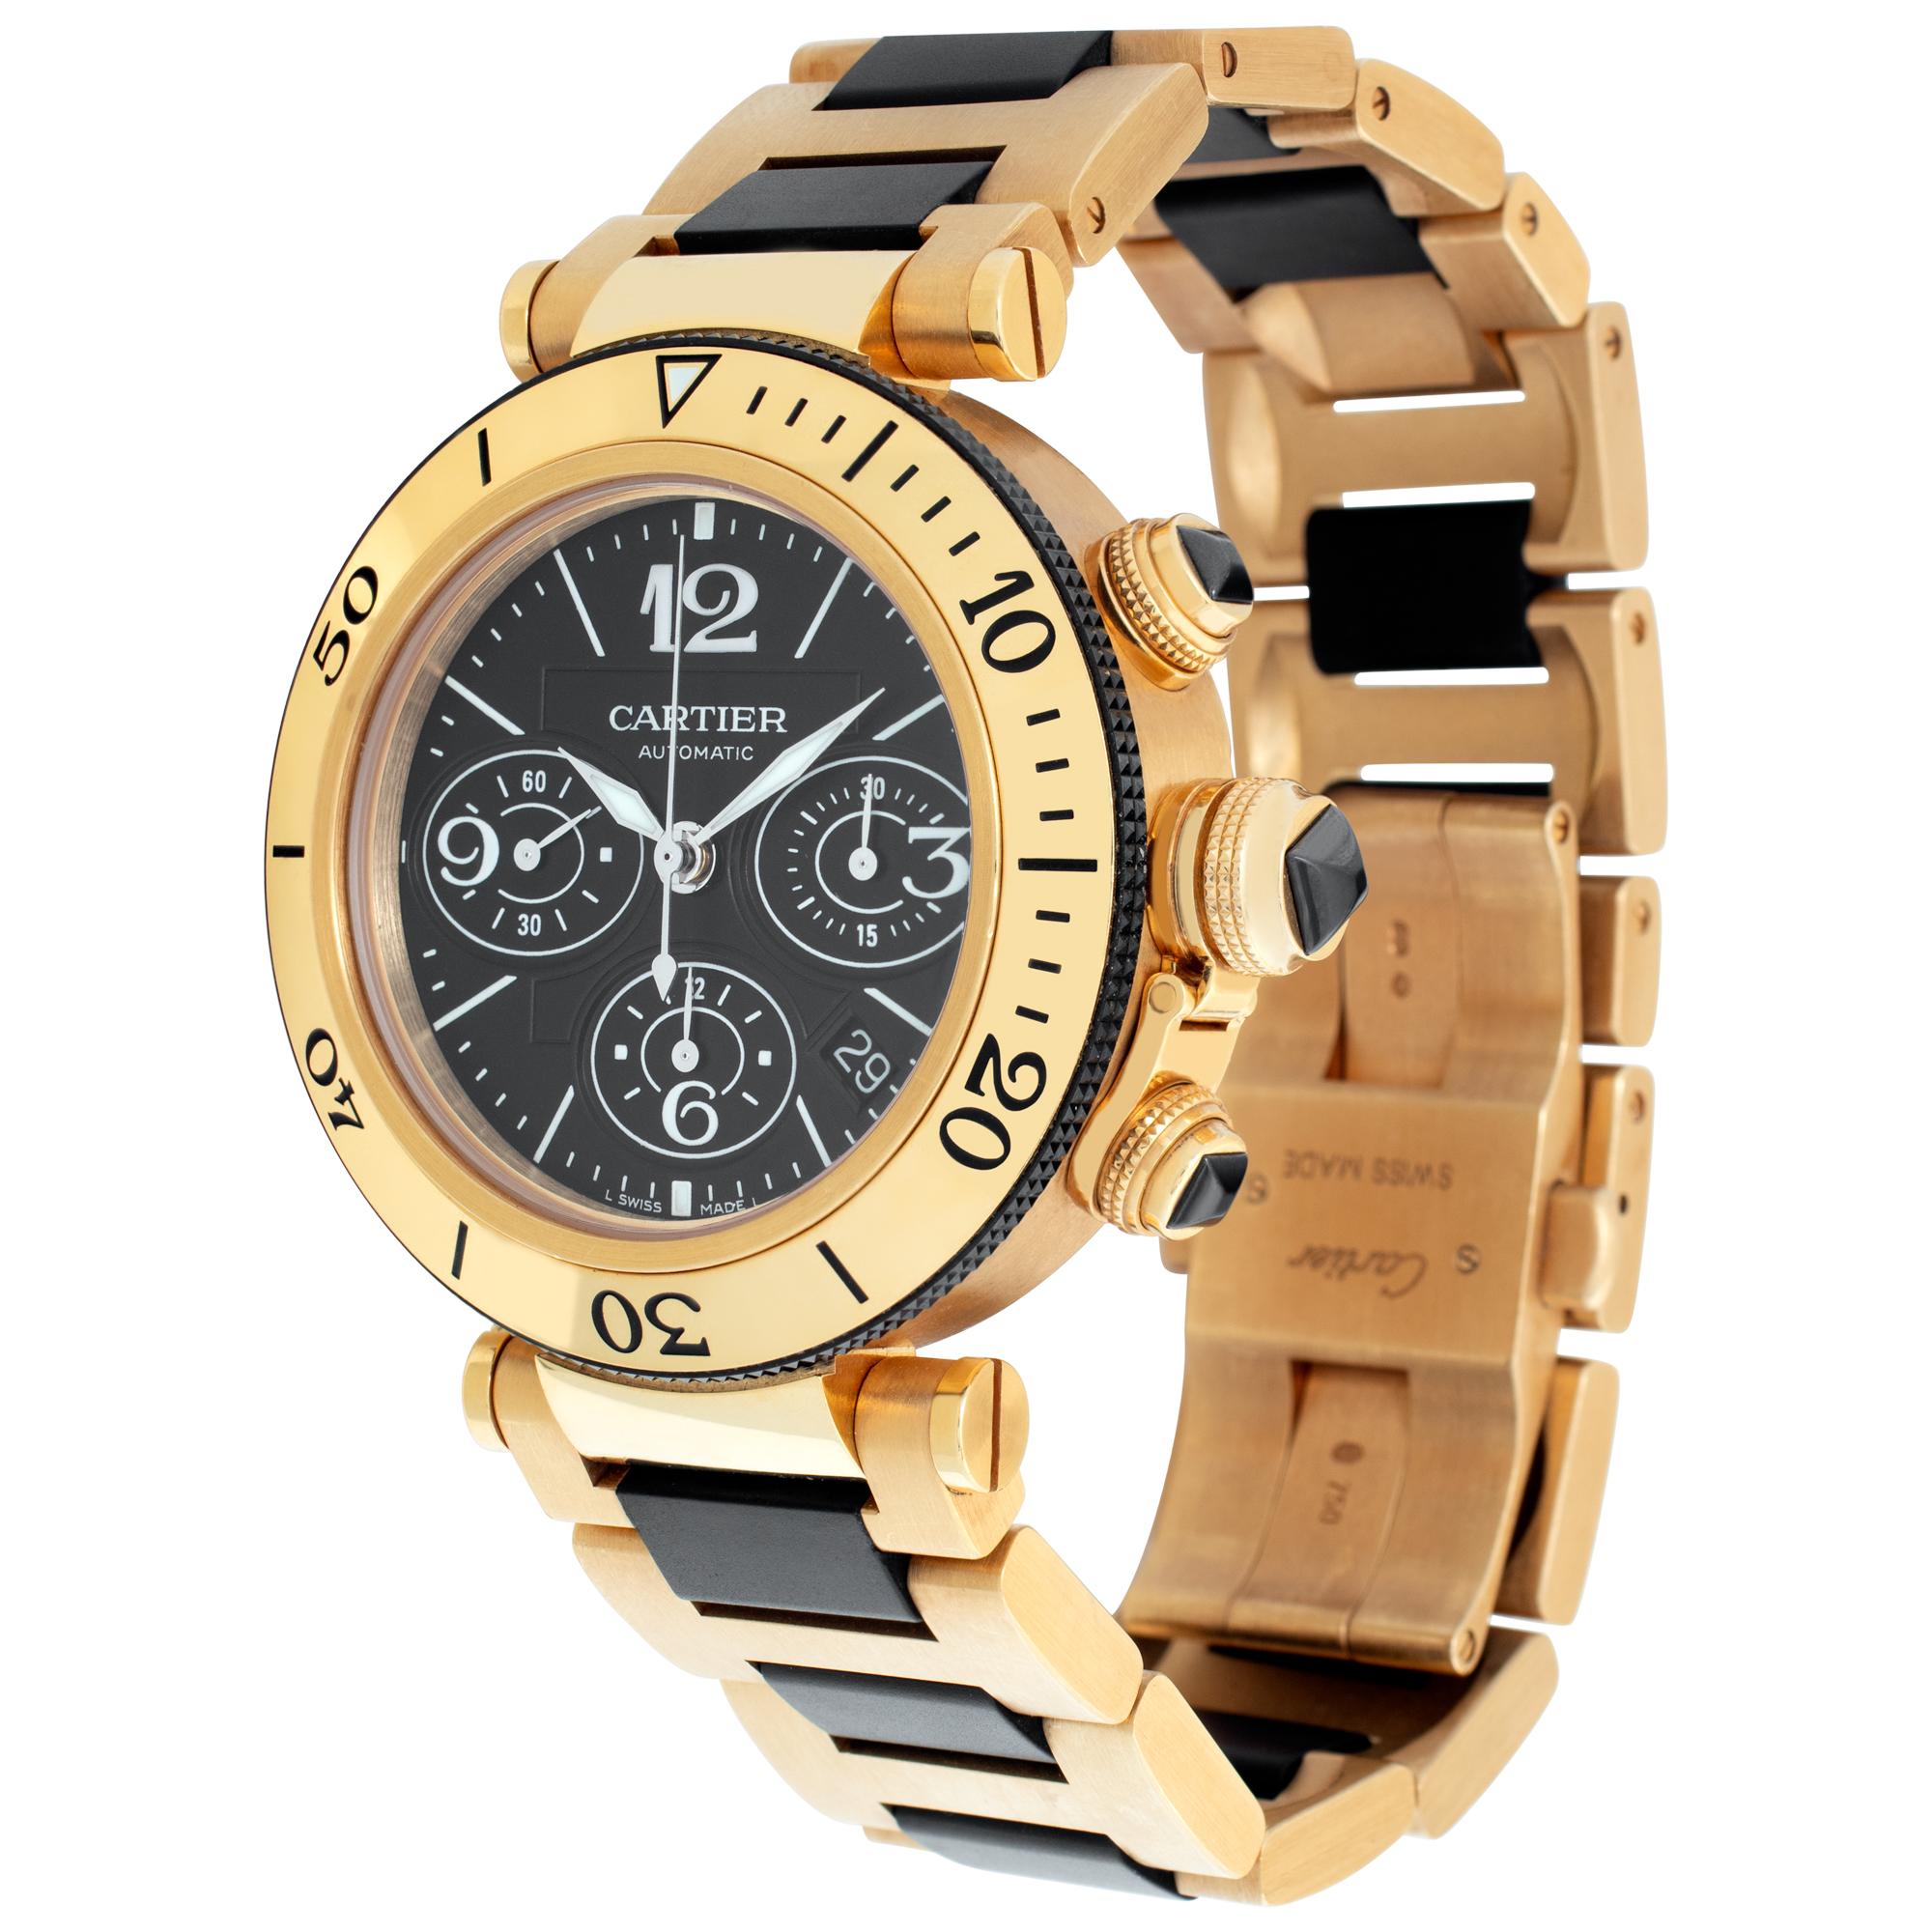 Cartier Pasha Seatimer Chrono in 18k yellow gold case on an 18k link band with rubber center with unidirectional rotating bezel with black ceramic edge. Auto w/ subseconds, date and chronograph. 42 mm case size. Ref W301970M. Fine Pre-owned Cartier